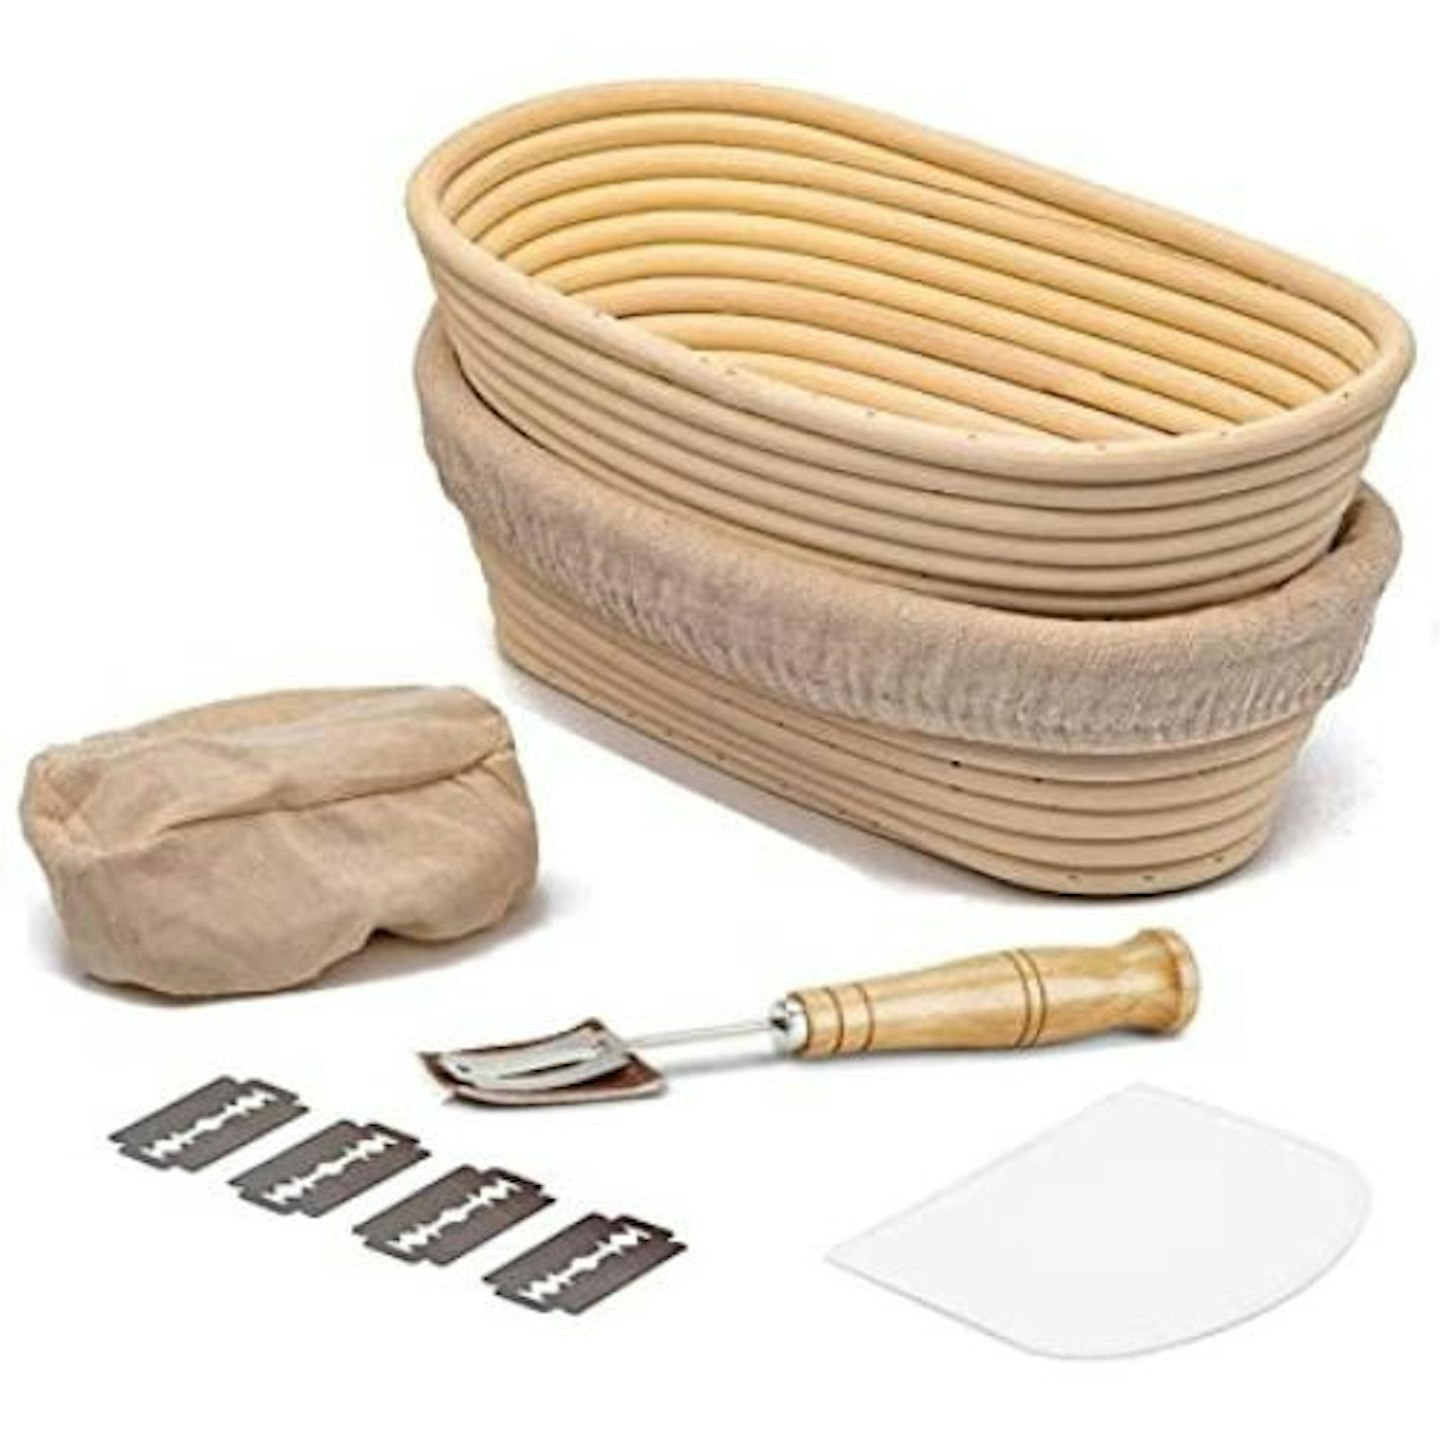 MIUTME 2 Pack Oval Bread Proofing Baskets